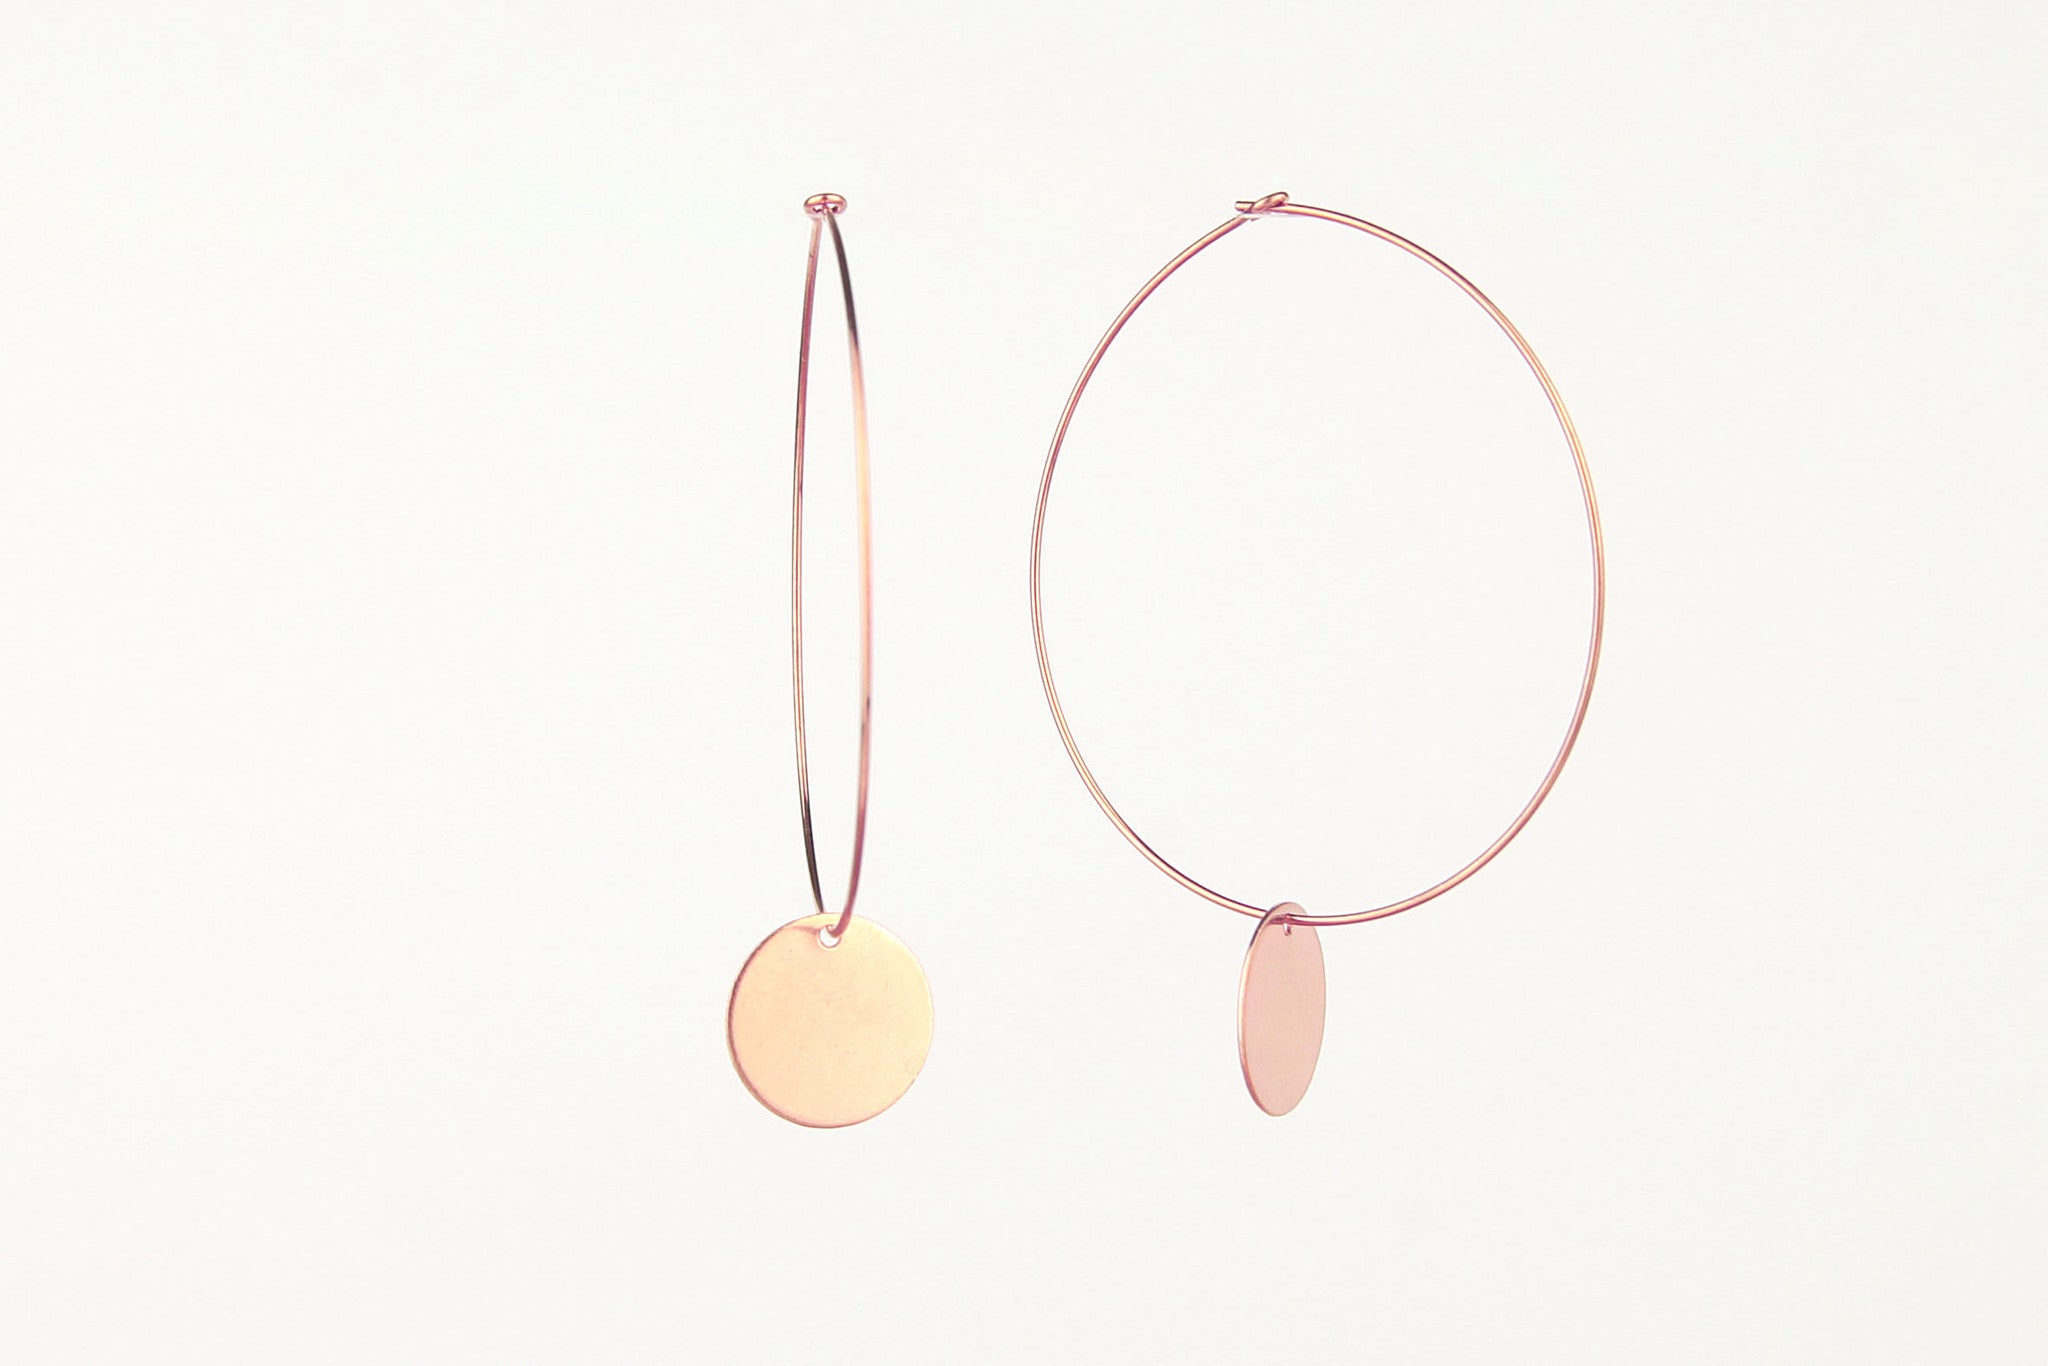 jewelberry ohrringe earrings medium disc hoops rose gold plated sterling silver fine jewelry handmade with love fairtrade